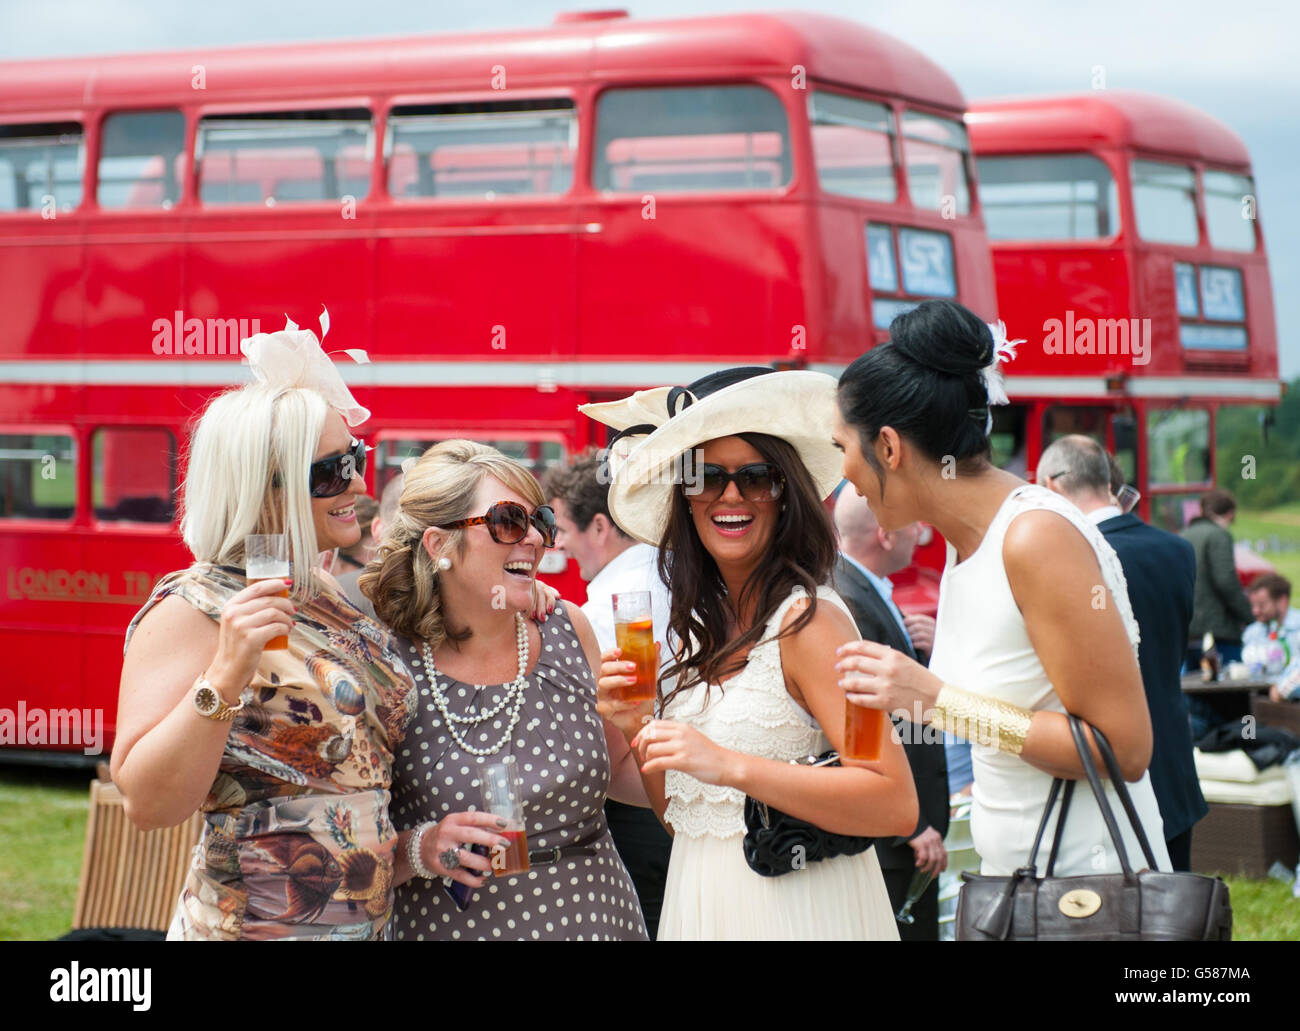 Racegoers enjoy a drink during Investec Ladies' Day of the Investec Derby Festival at Epsom Racecourse. PRESS ASSOCIATION Photo. Picture date: Friday June 1, 2012. See PA story RACING Epsom. Photo credit should read: Dominic Lipinski/PA Wireduring Investec Ladies' Day of the Investec Derby Festival at Epsom Racecourse. PRESS ASSOCIATION Photo. Picture date: Friday June 1, 2012. See PA story RACING Epsom. Photo credit should read: Dominic Lipinski/PA Wire Stock Photo